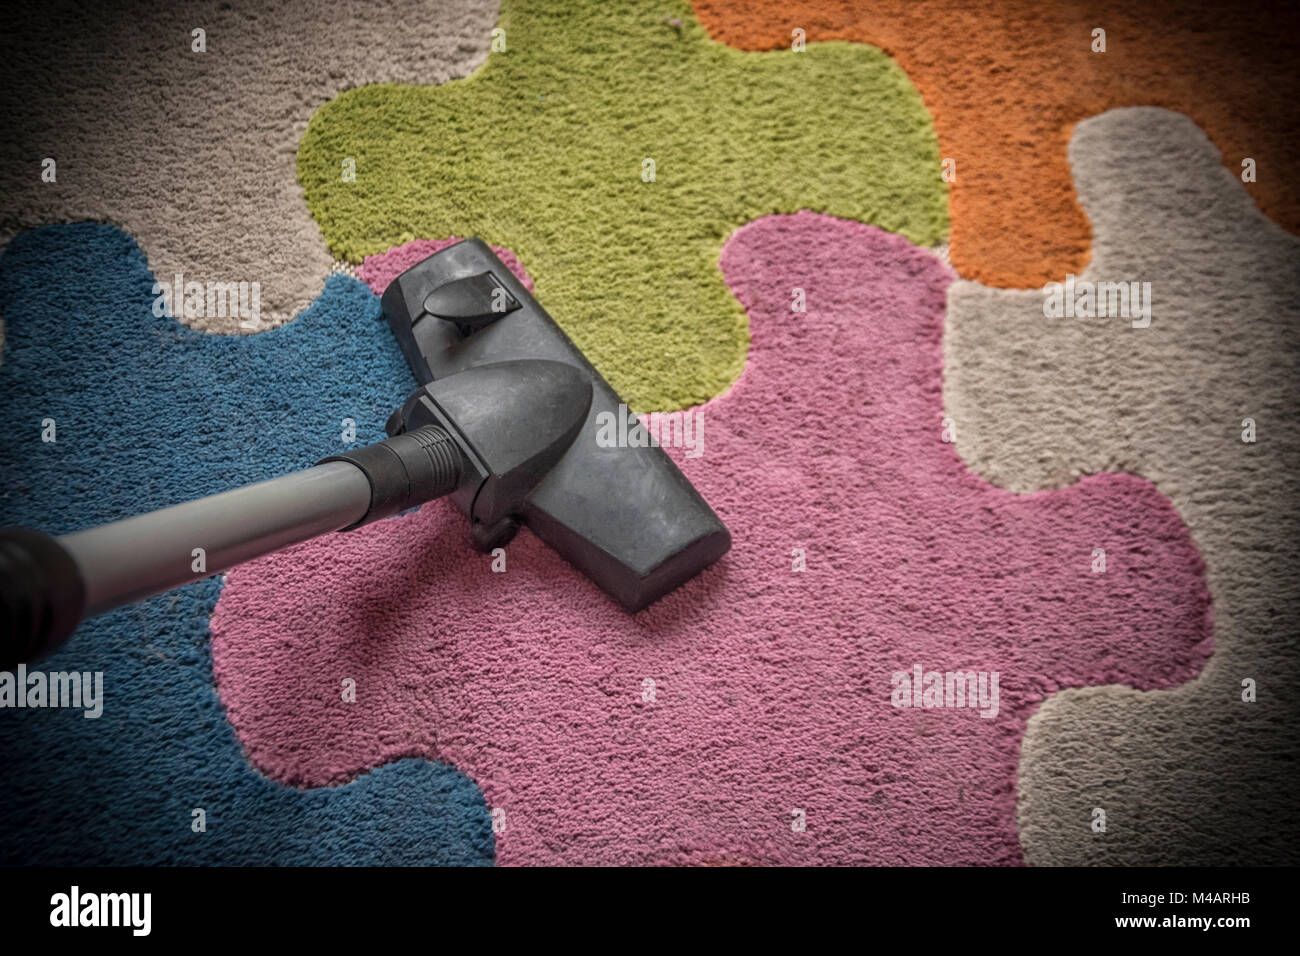 A vacuum cleaner on a colorful carpet Stock Photo